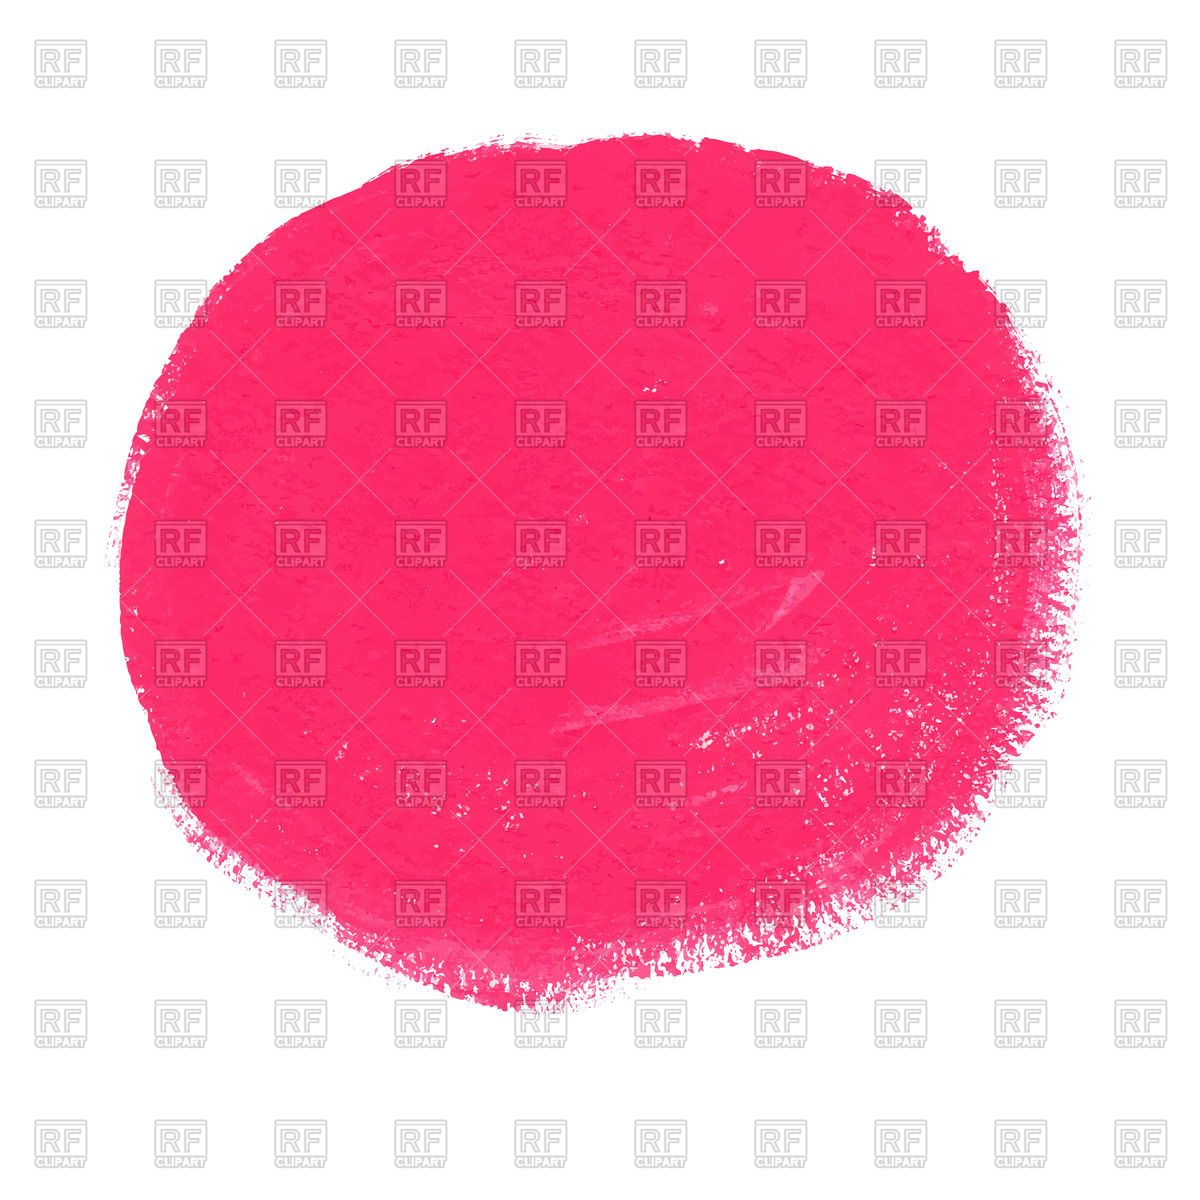 Pink Acrylic Paint Circle 55379 Download Royalty Free Vector Clipart